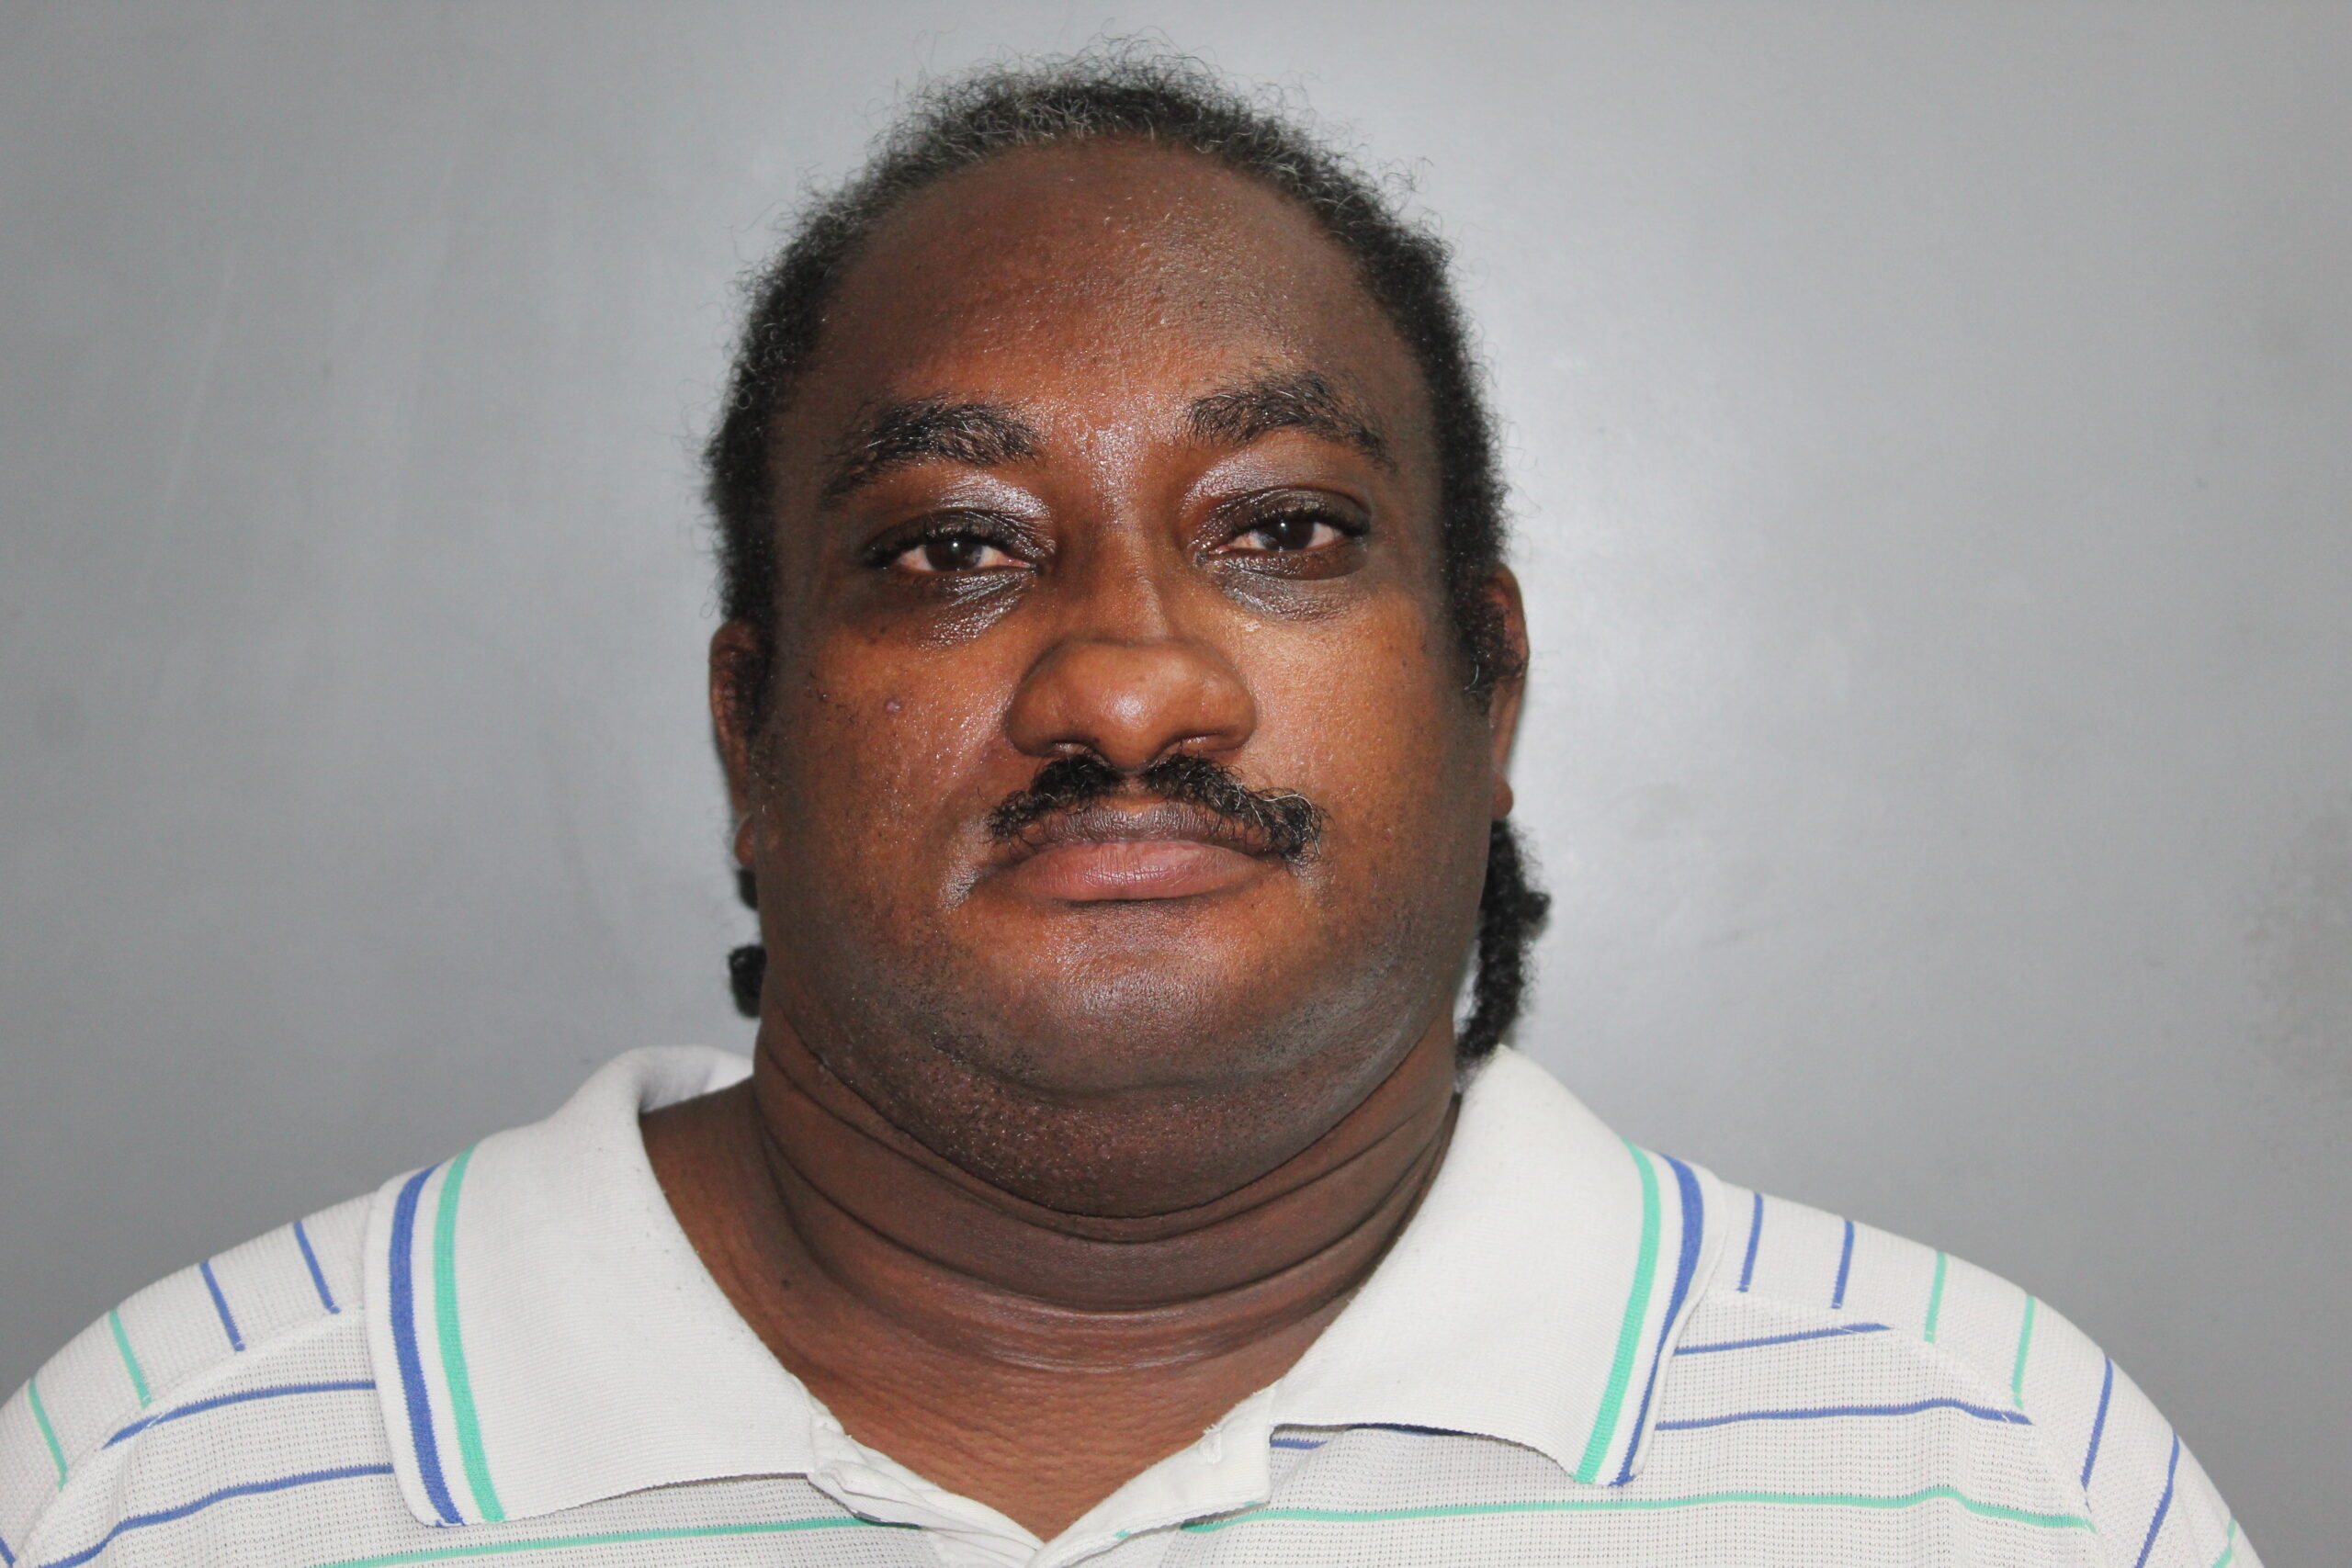 Cane Carlton Man Arrested After Depositing $5,000 In Fraudulent Checks: VIPD